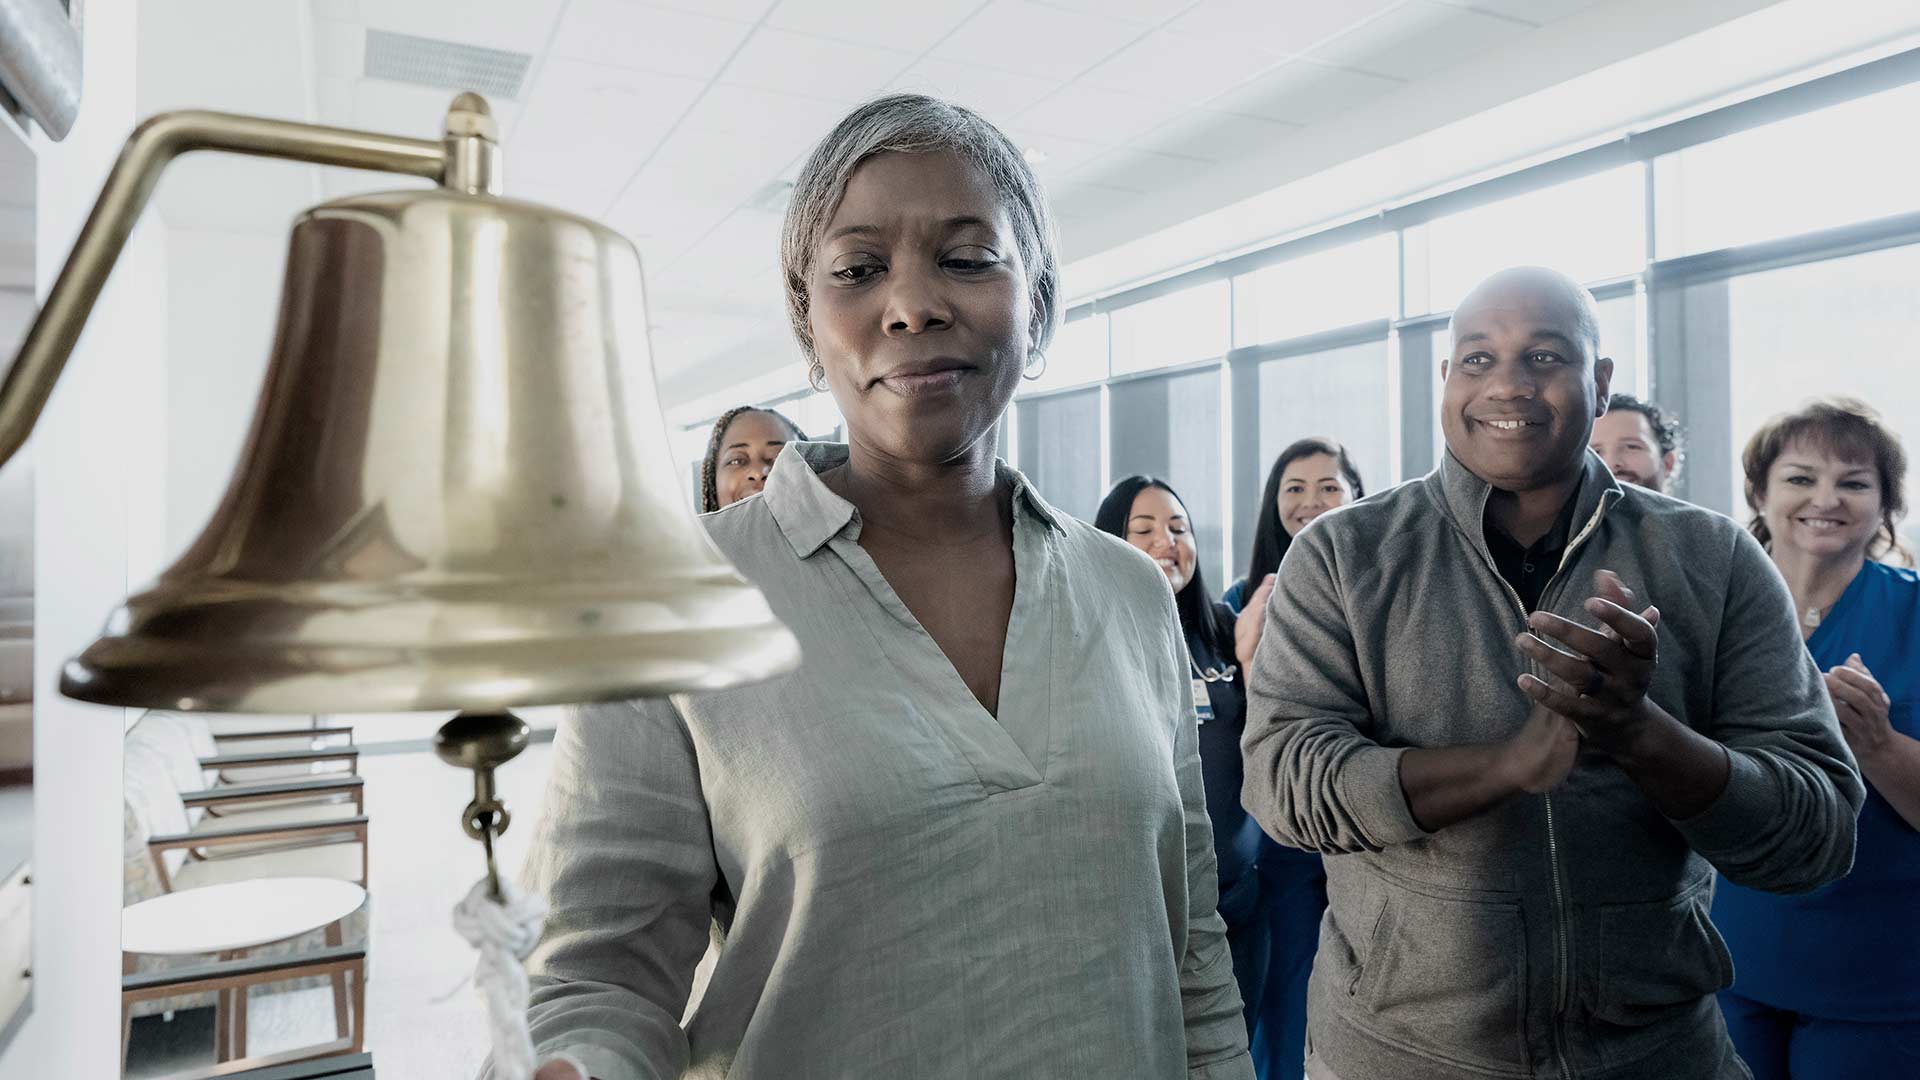 A patient rings a bell after finishing chemotherapy